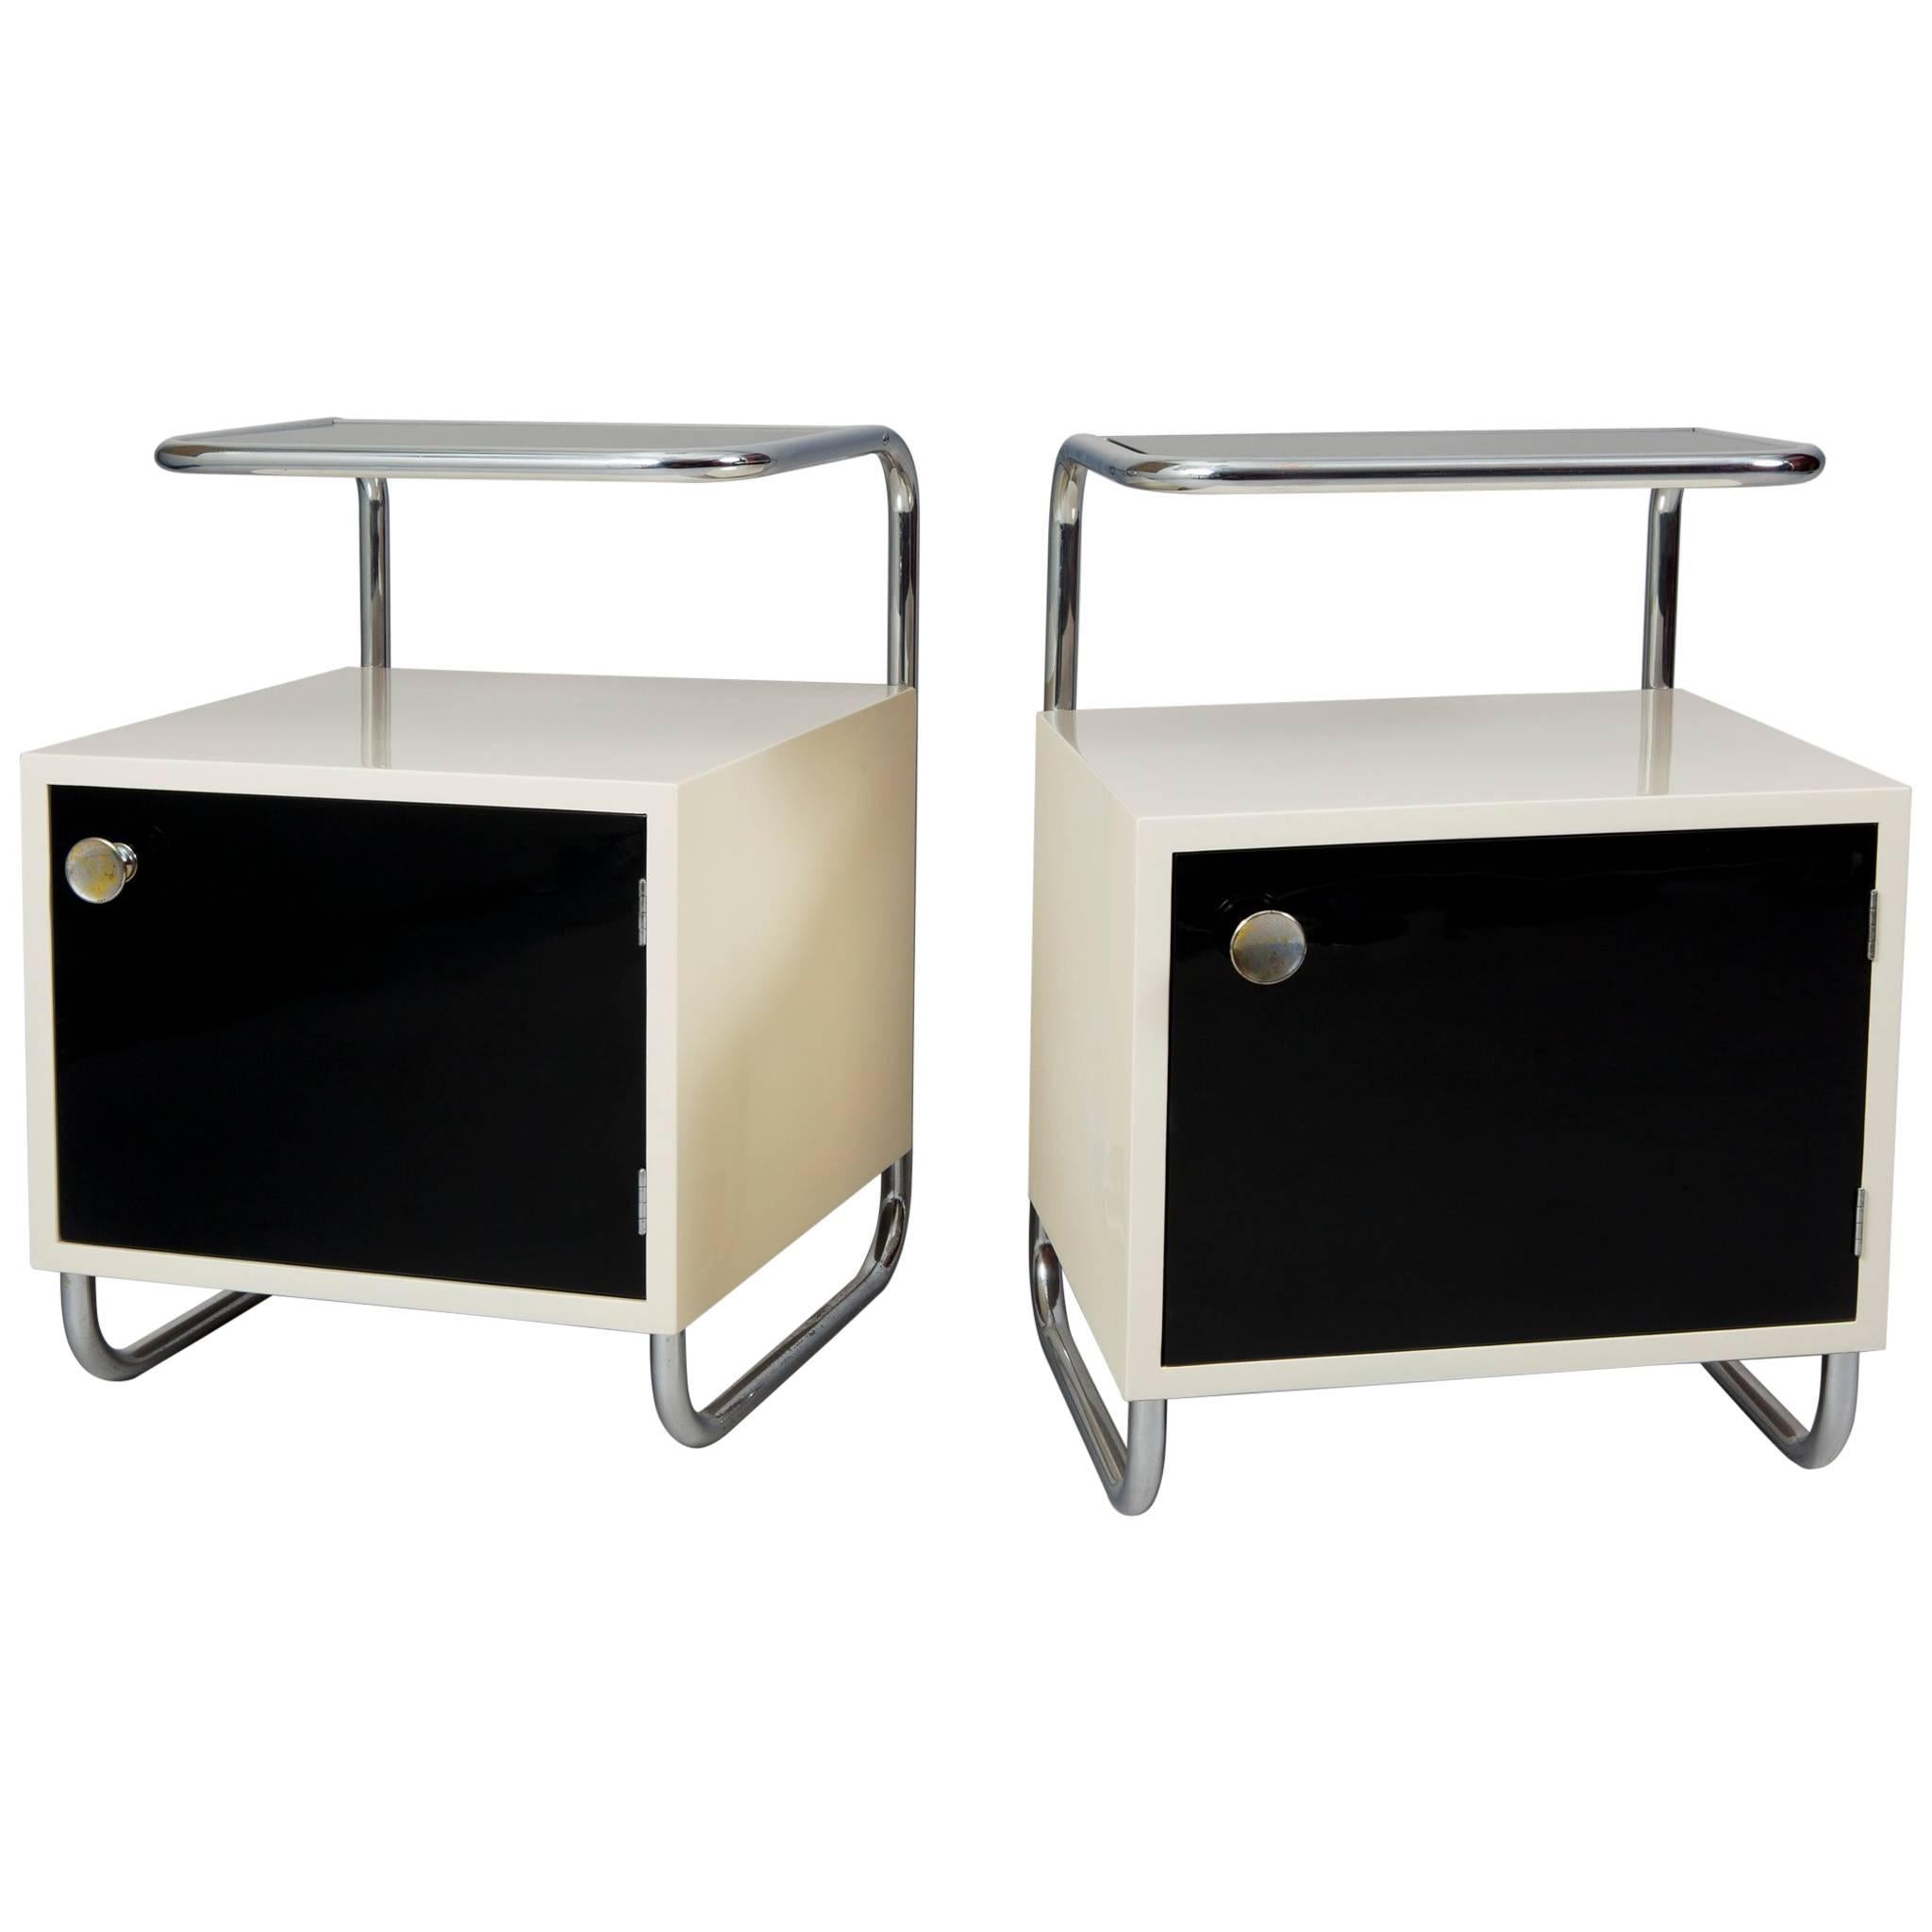 Pair of Black & White Functionalism Bed-Side Tables, Maker Vichr, Czechoslovakia